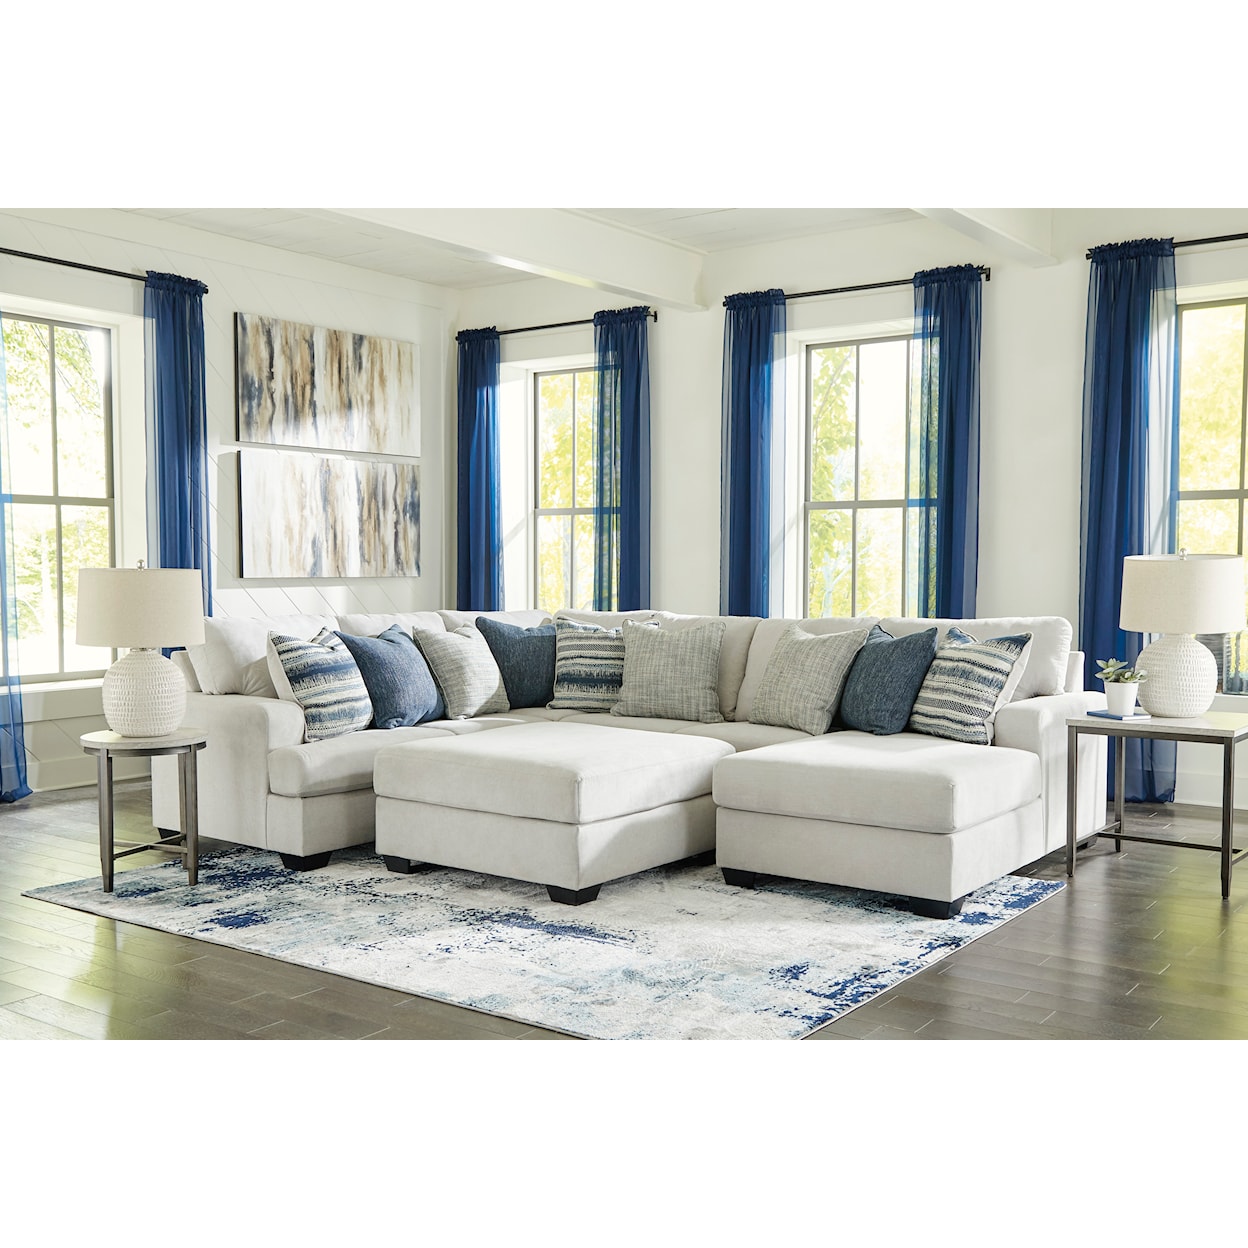 Benchcraft Lowder 4-Piece Sectional with Chaise